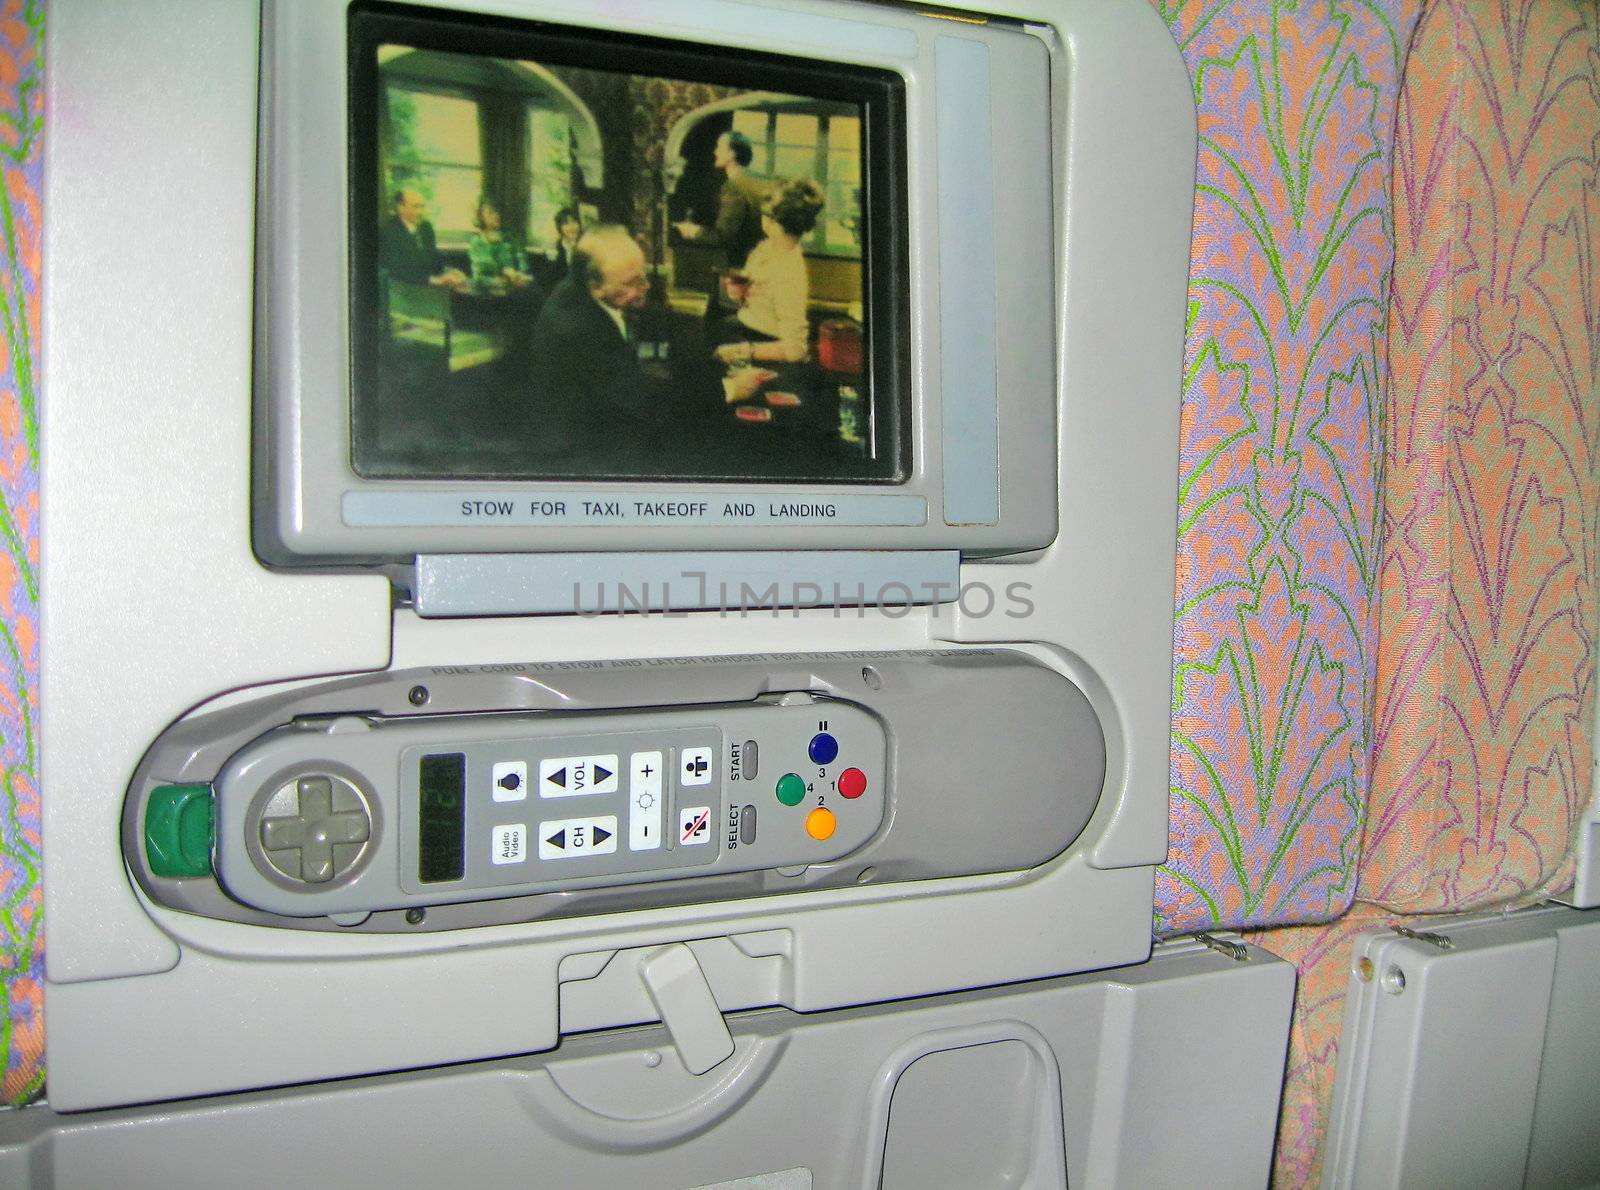 TV set with remote control on the airplane seat.